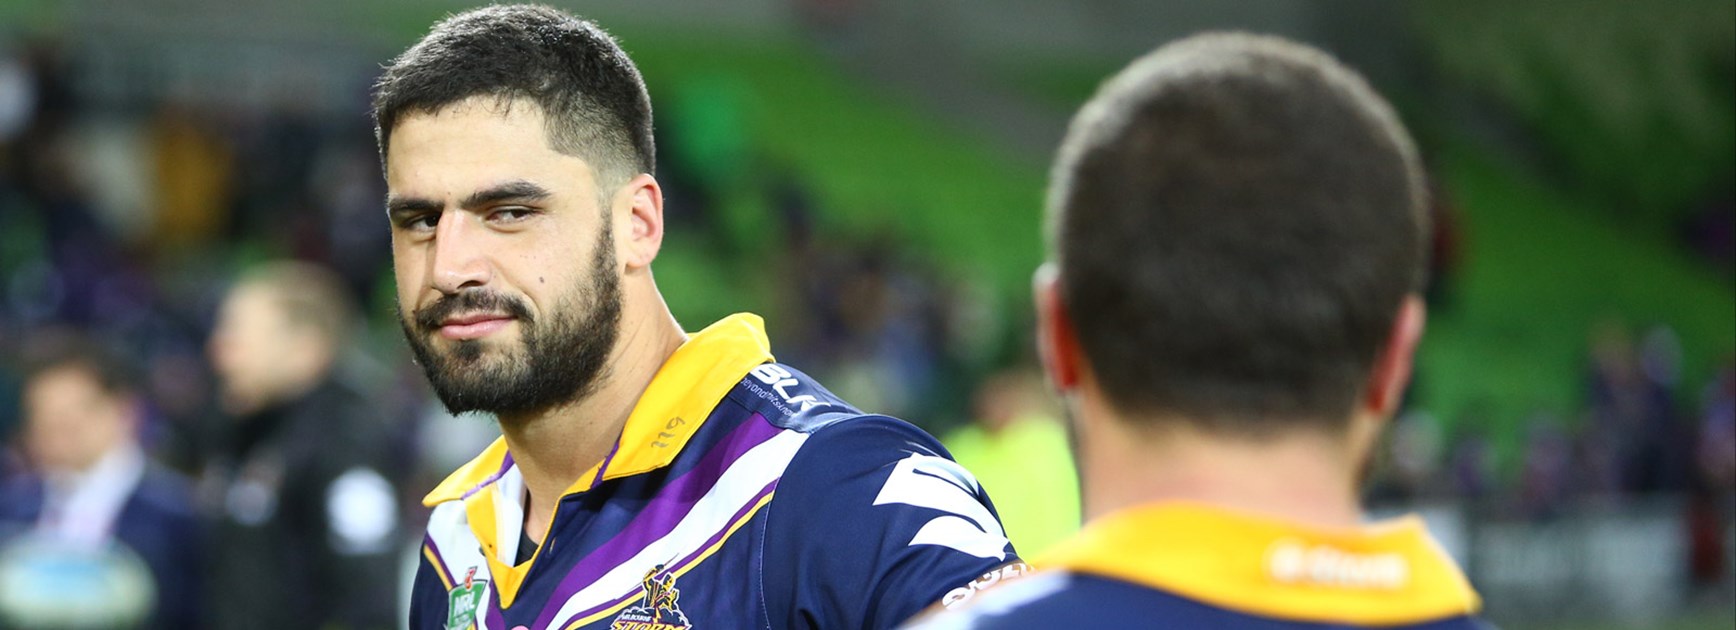 Storm prop Jesse Bromwich was placed on report in his side's win over the Dragons.